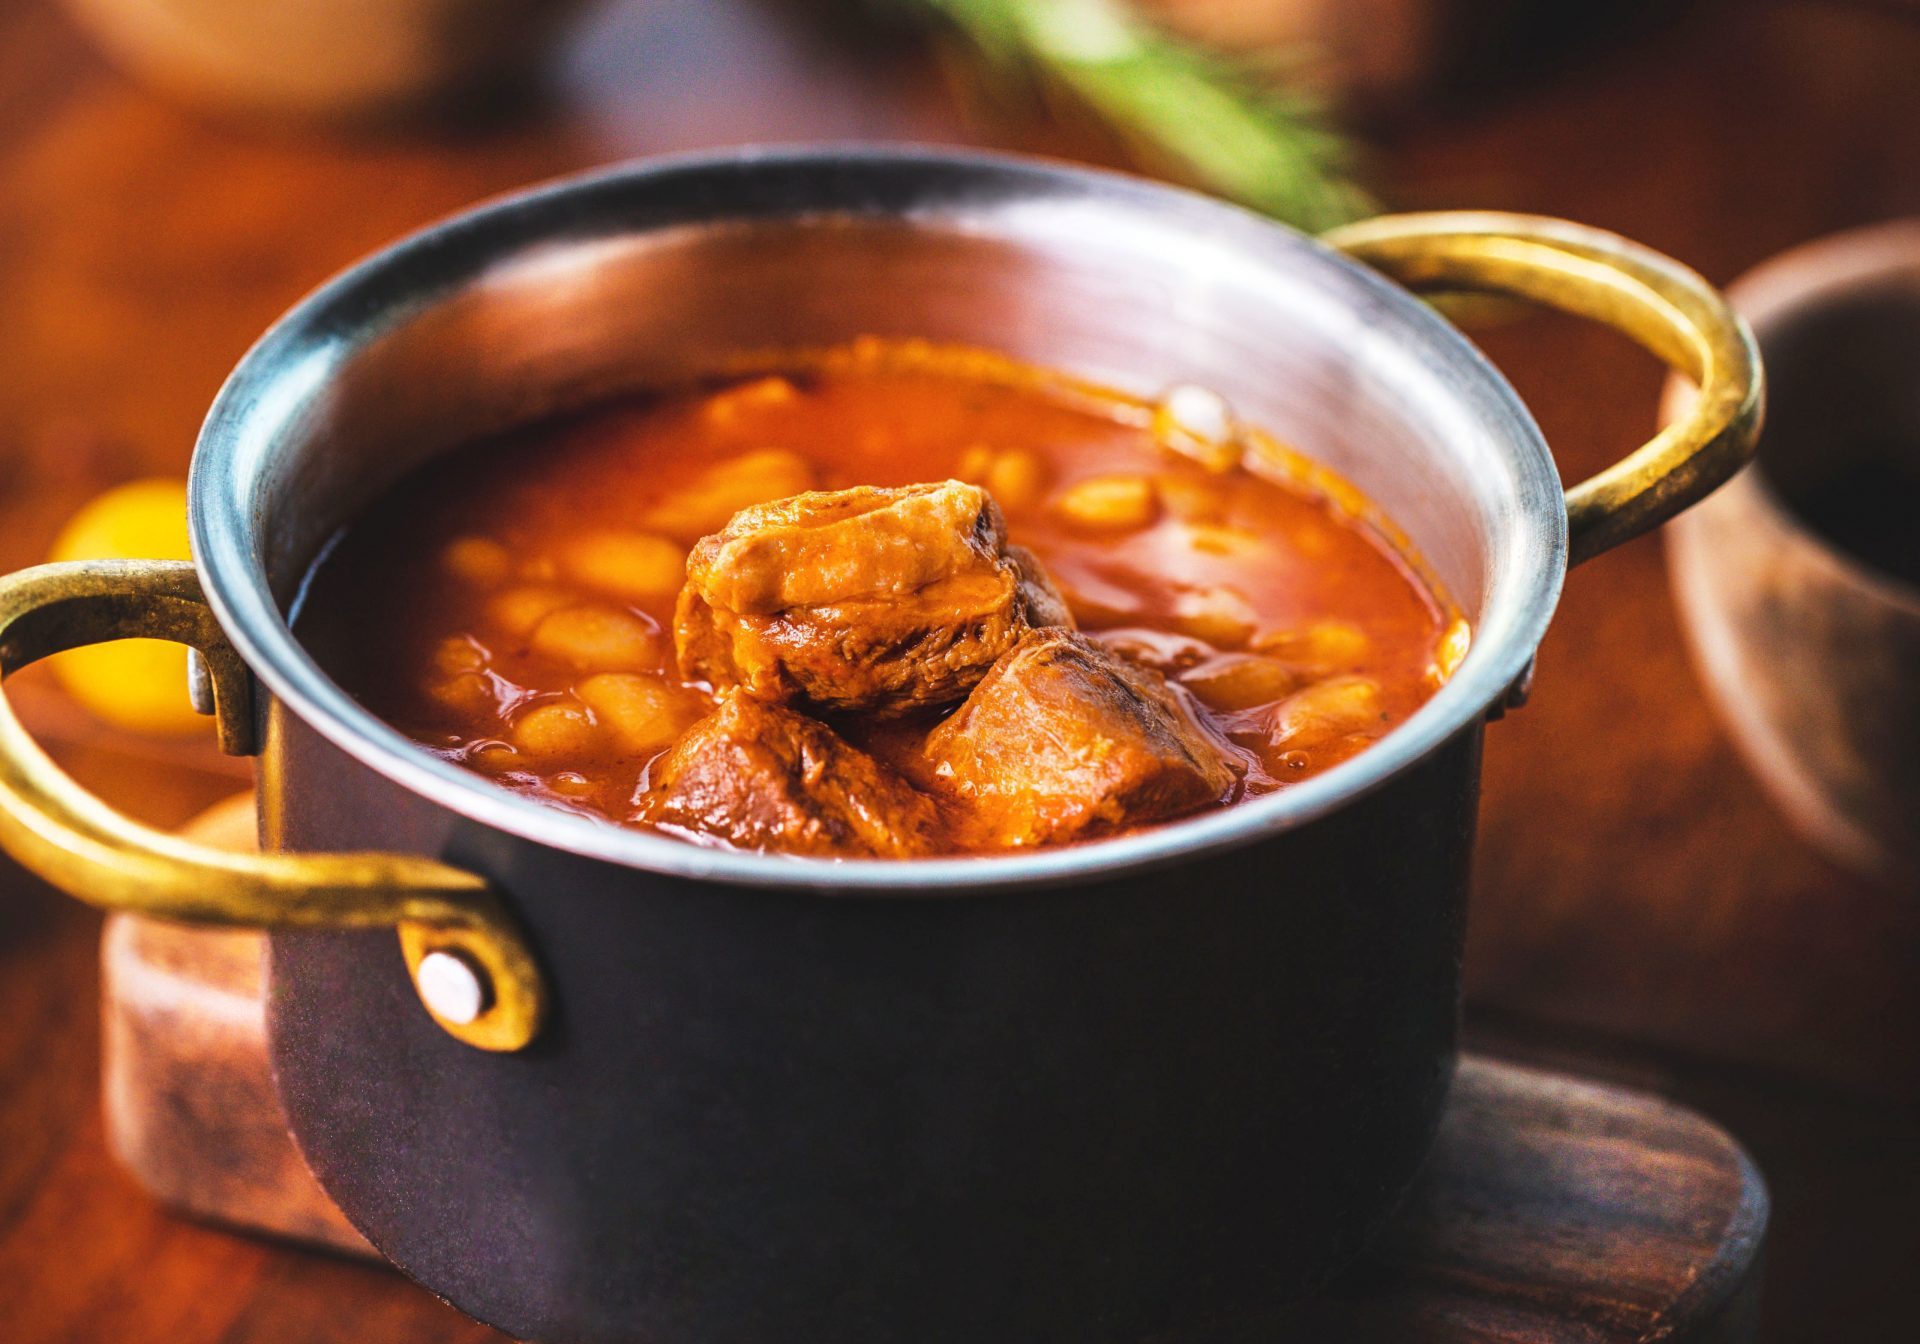 red soup with beans and meat in a pan, standing on a wooden table with rosemary